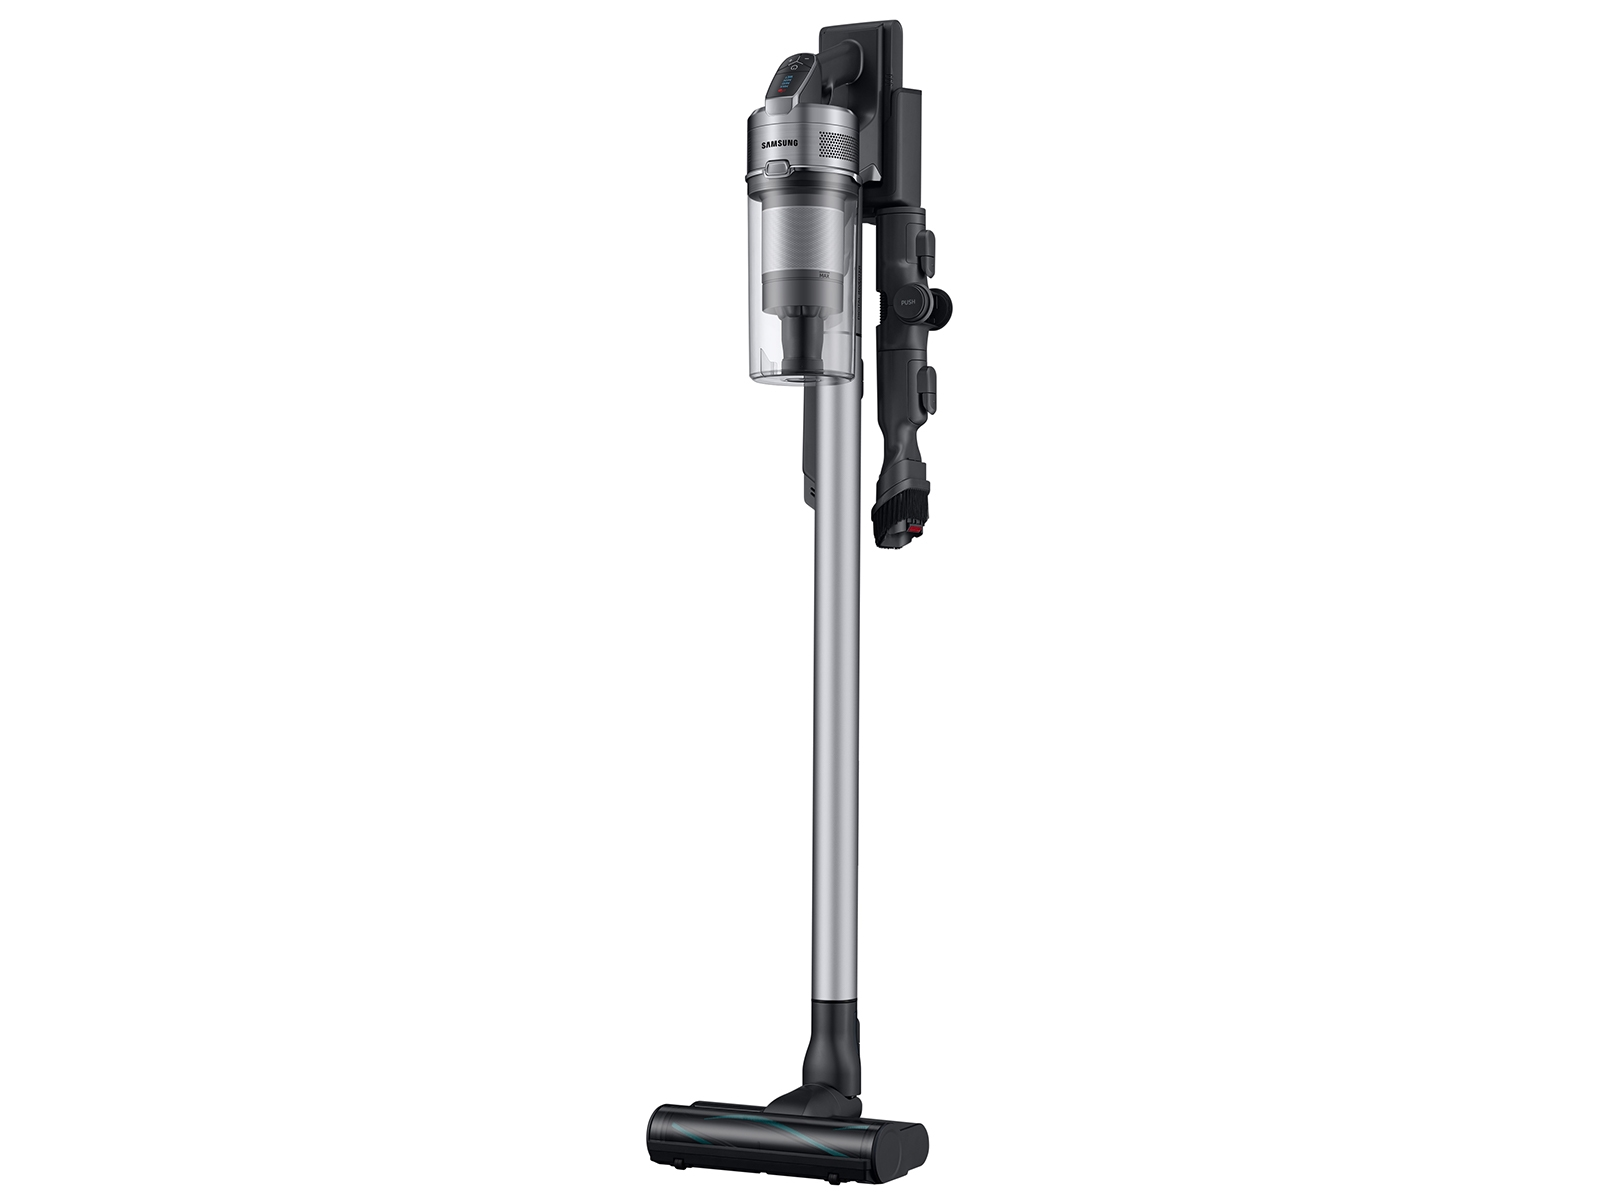 YMMV - $79 with S21 $200 launch promo code - Samsung Jet 75 Complete Cordless Stick vacuum+ extra battery + galaxy smarttag $79